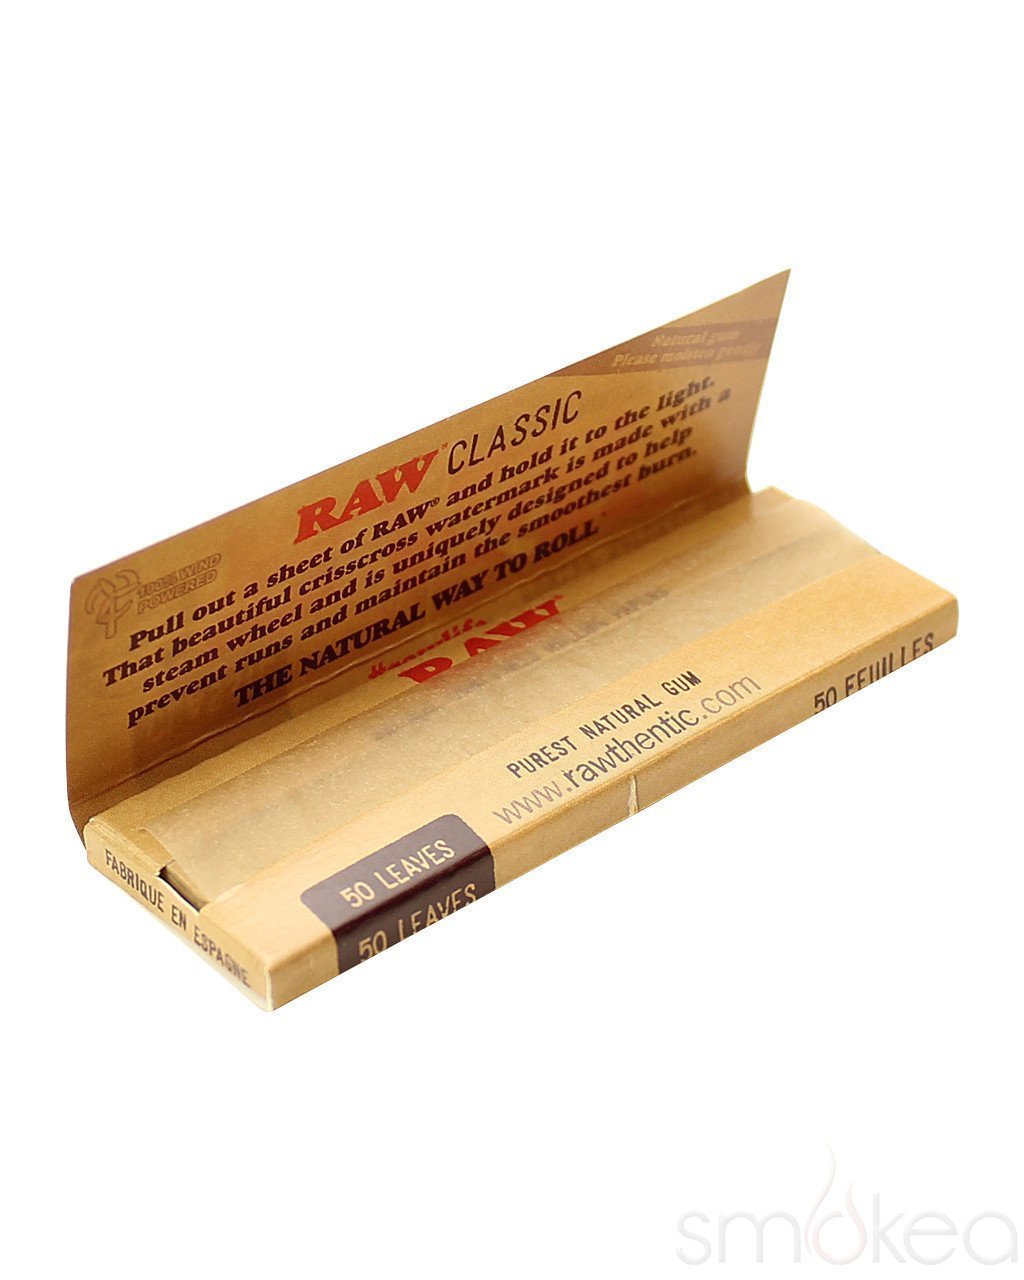 https://outontrip.com/cdn/shop/products/raw-papers-raw-classic-1-1-4-rolling-papers-21162213121_1400x_45f4a3d1-2350-4e3c-823a-1bc456022ef9_1024x.jpg?v=1598685641